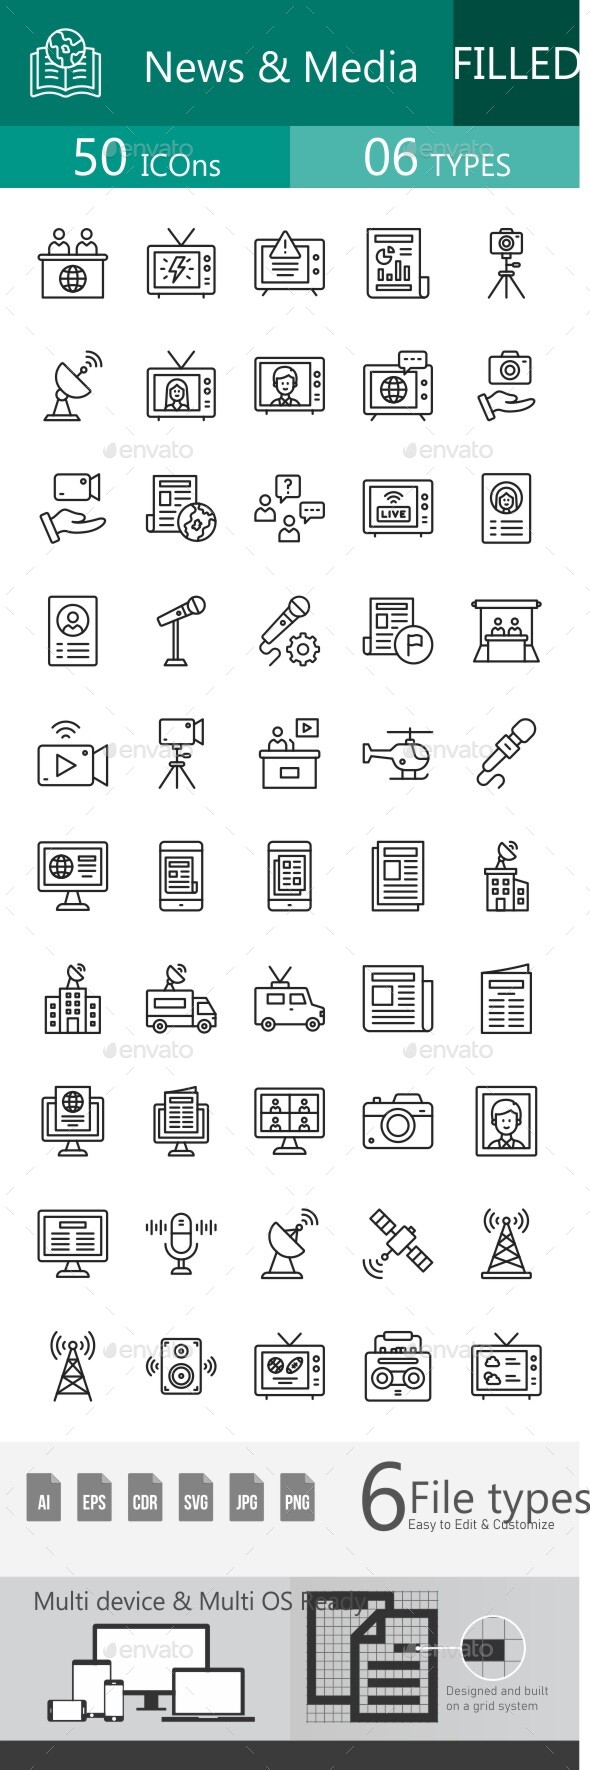 [DOWNLOAD]News & Media Line Icons